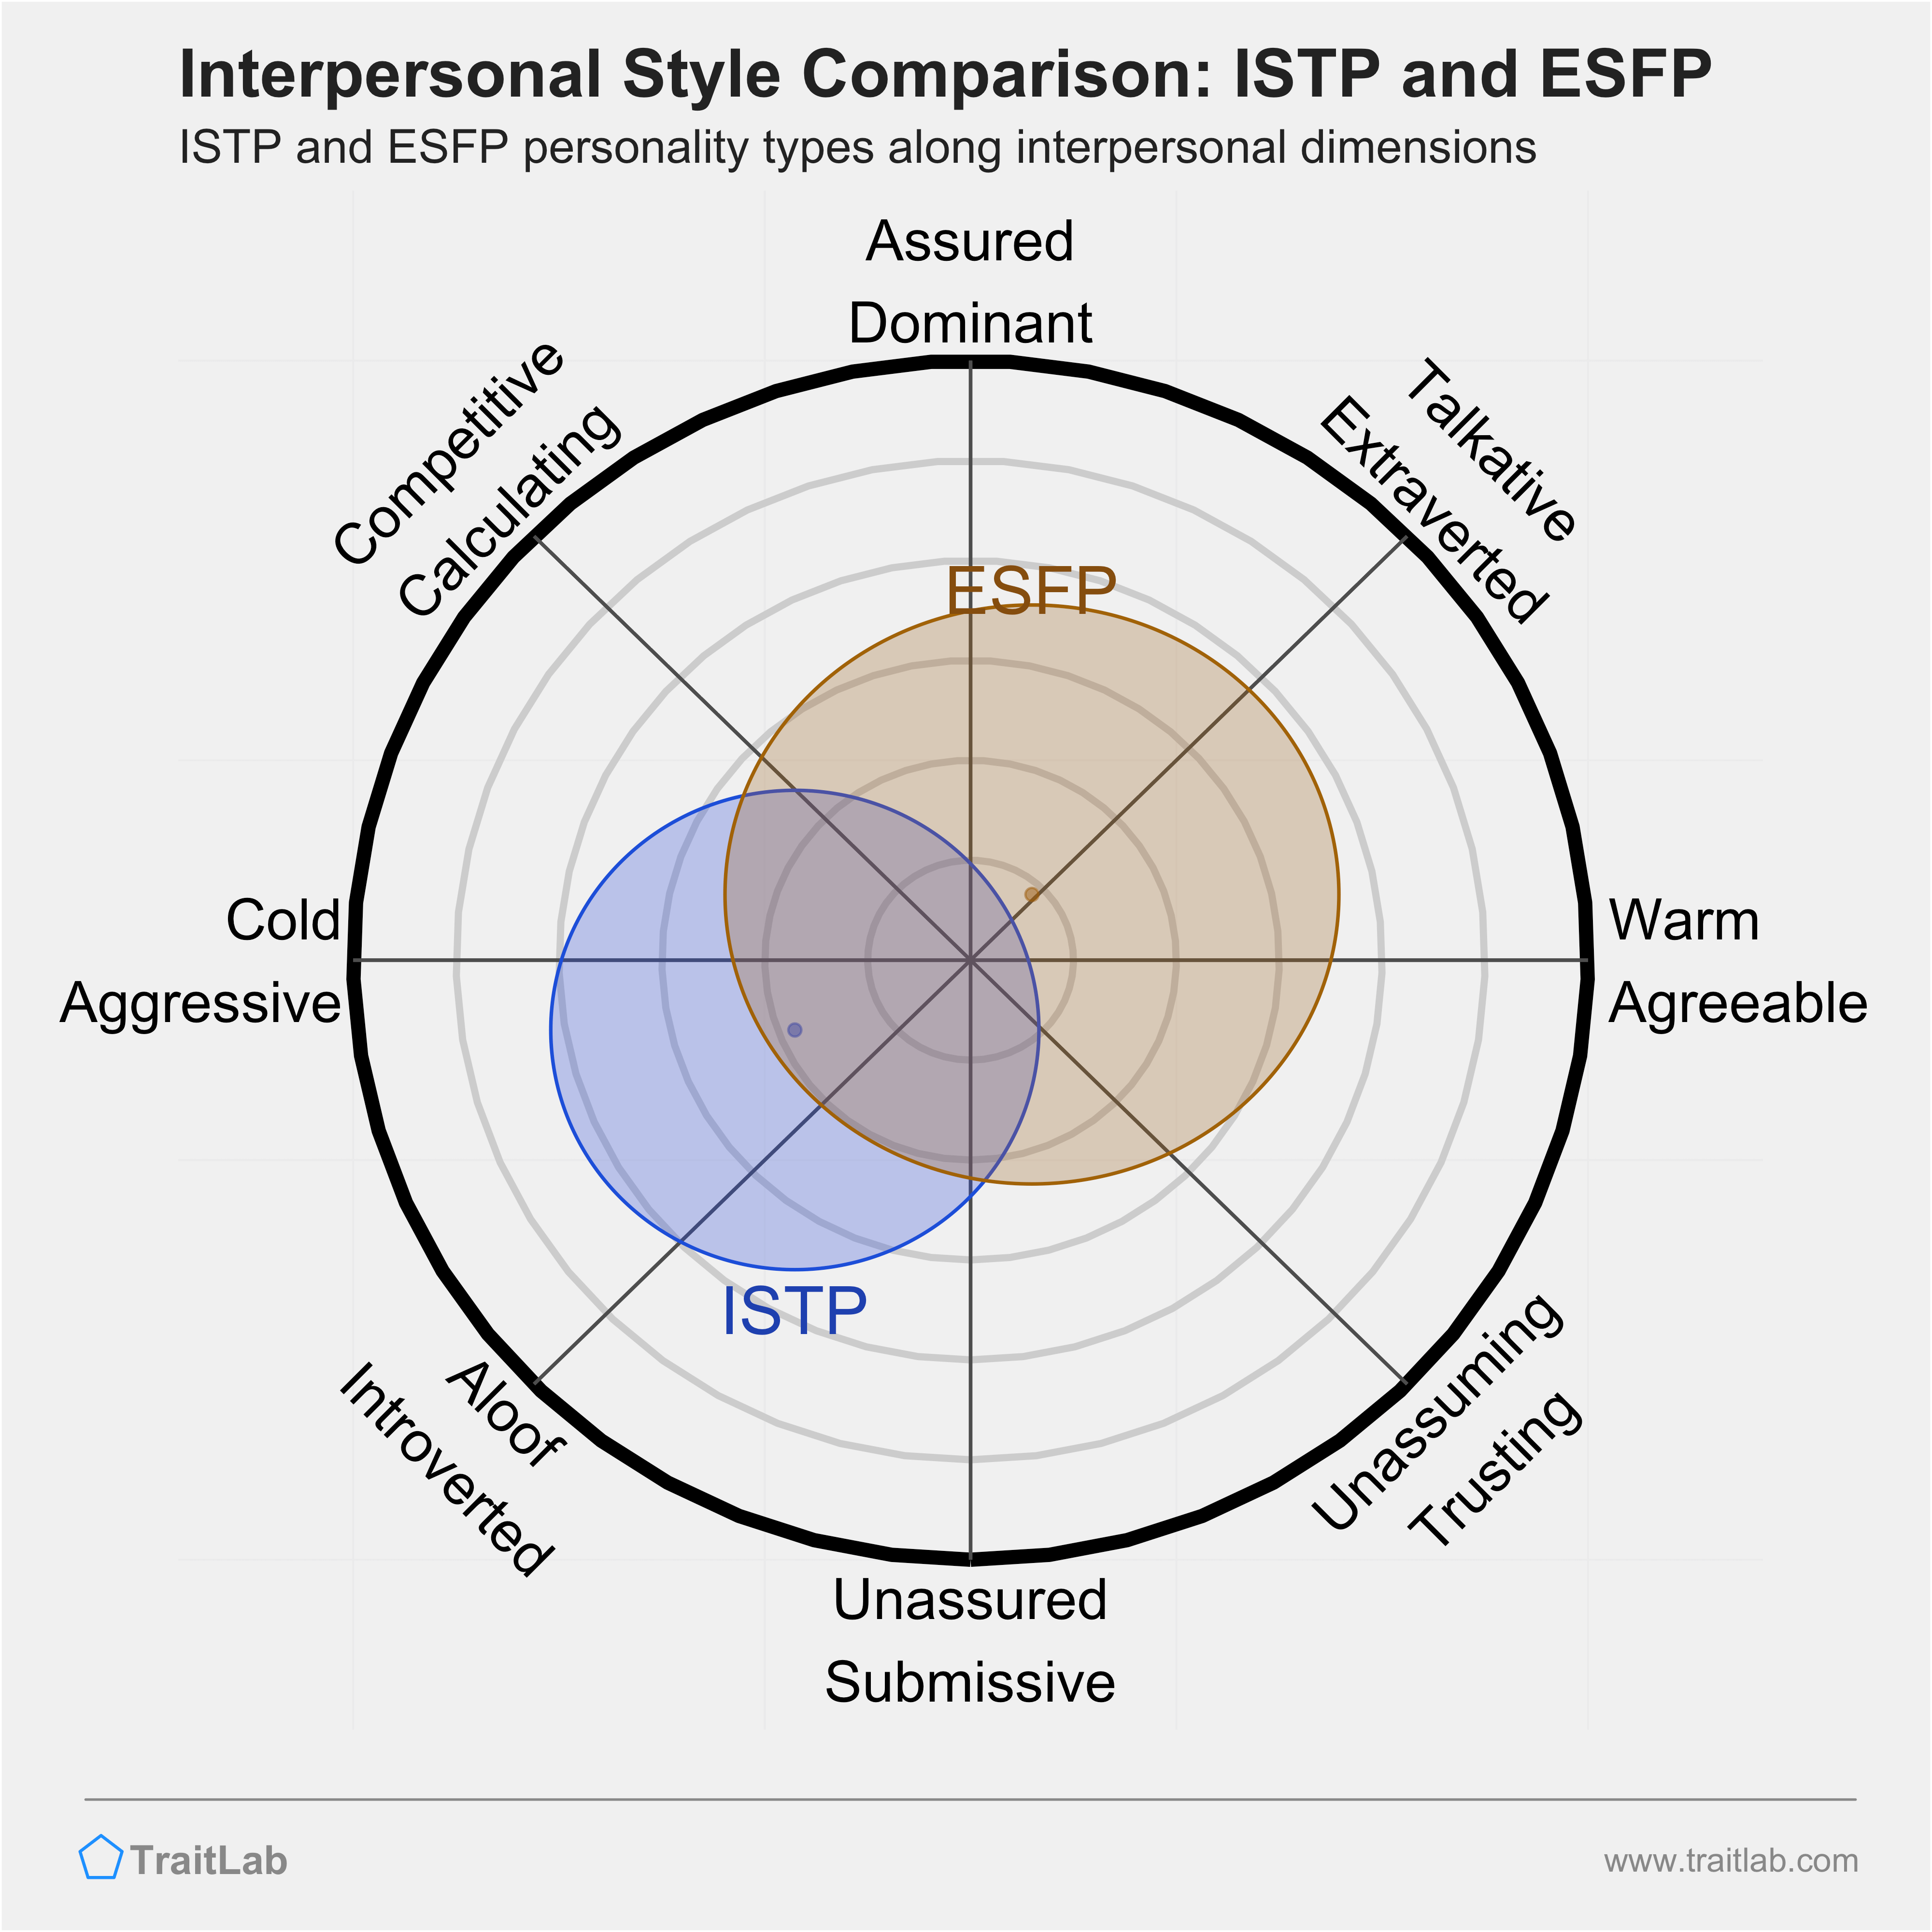 ISTP and ESFP comparison across interpersonal dimensions